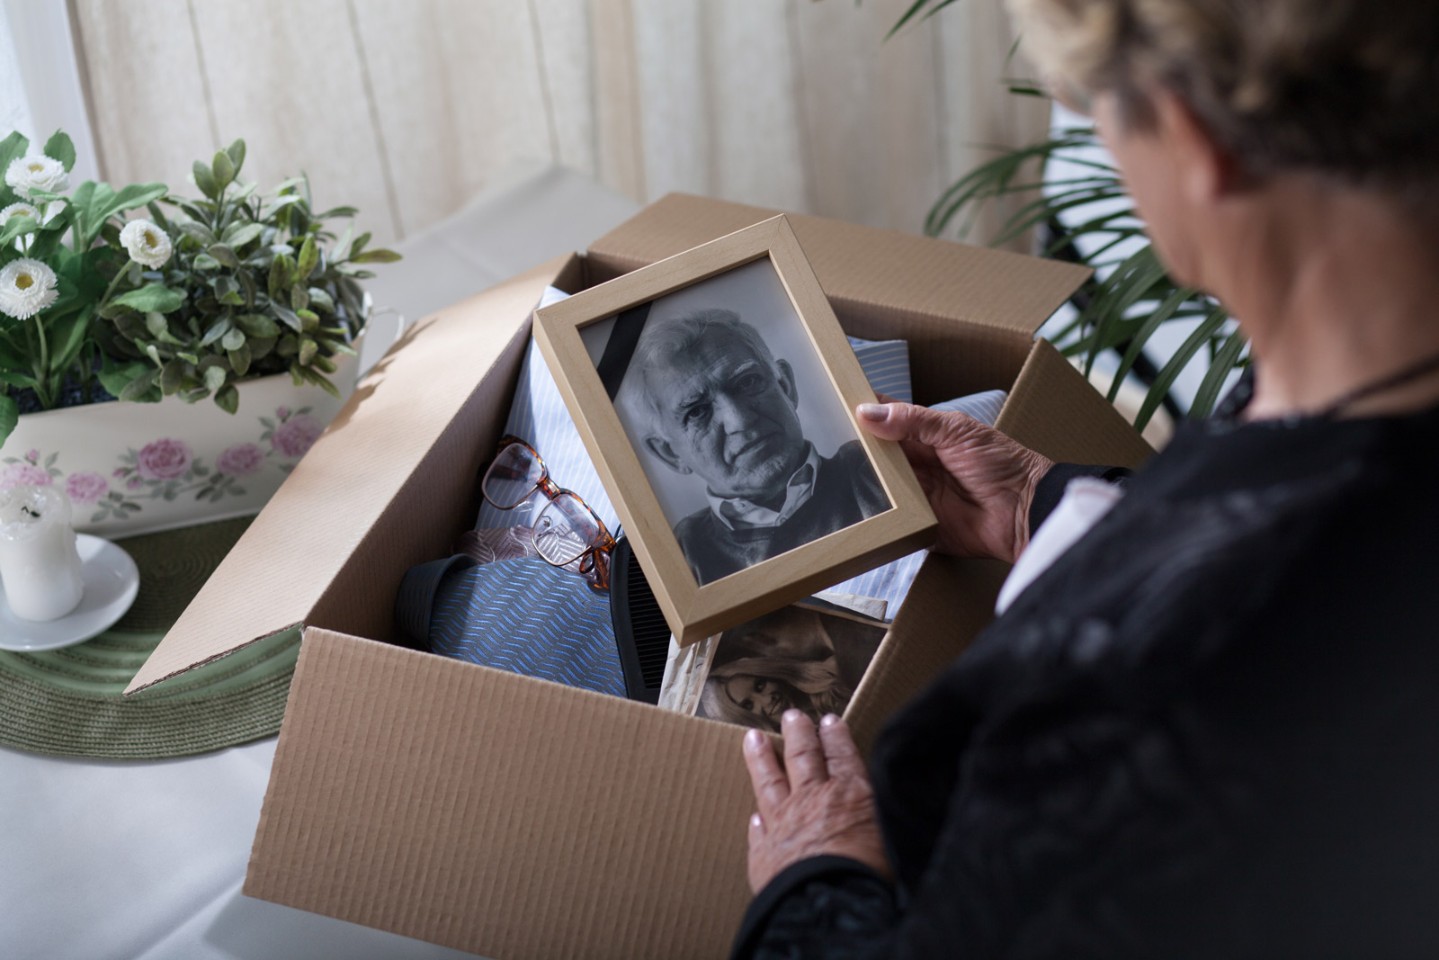 Older woman looking in a box of things and holding a black and white photo of an old man